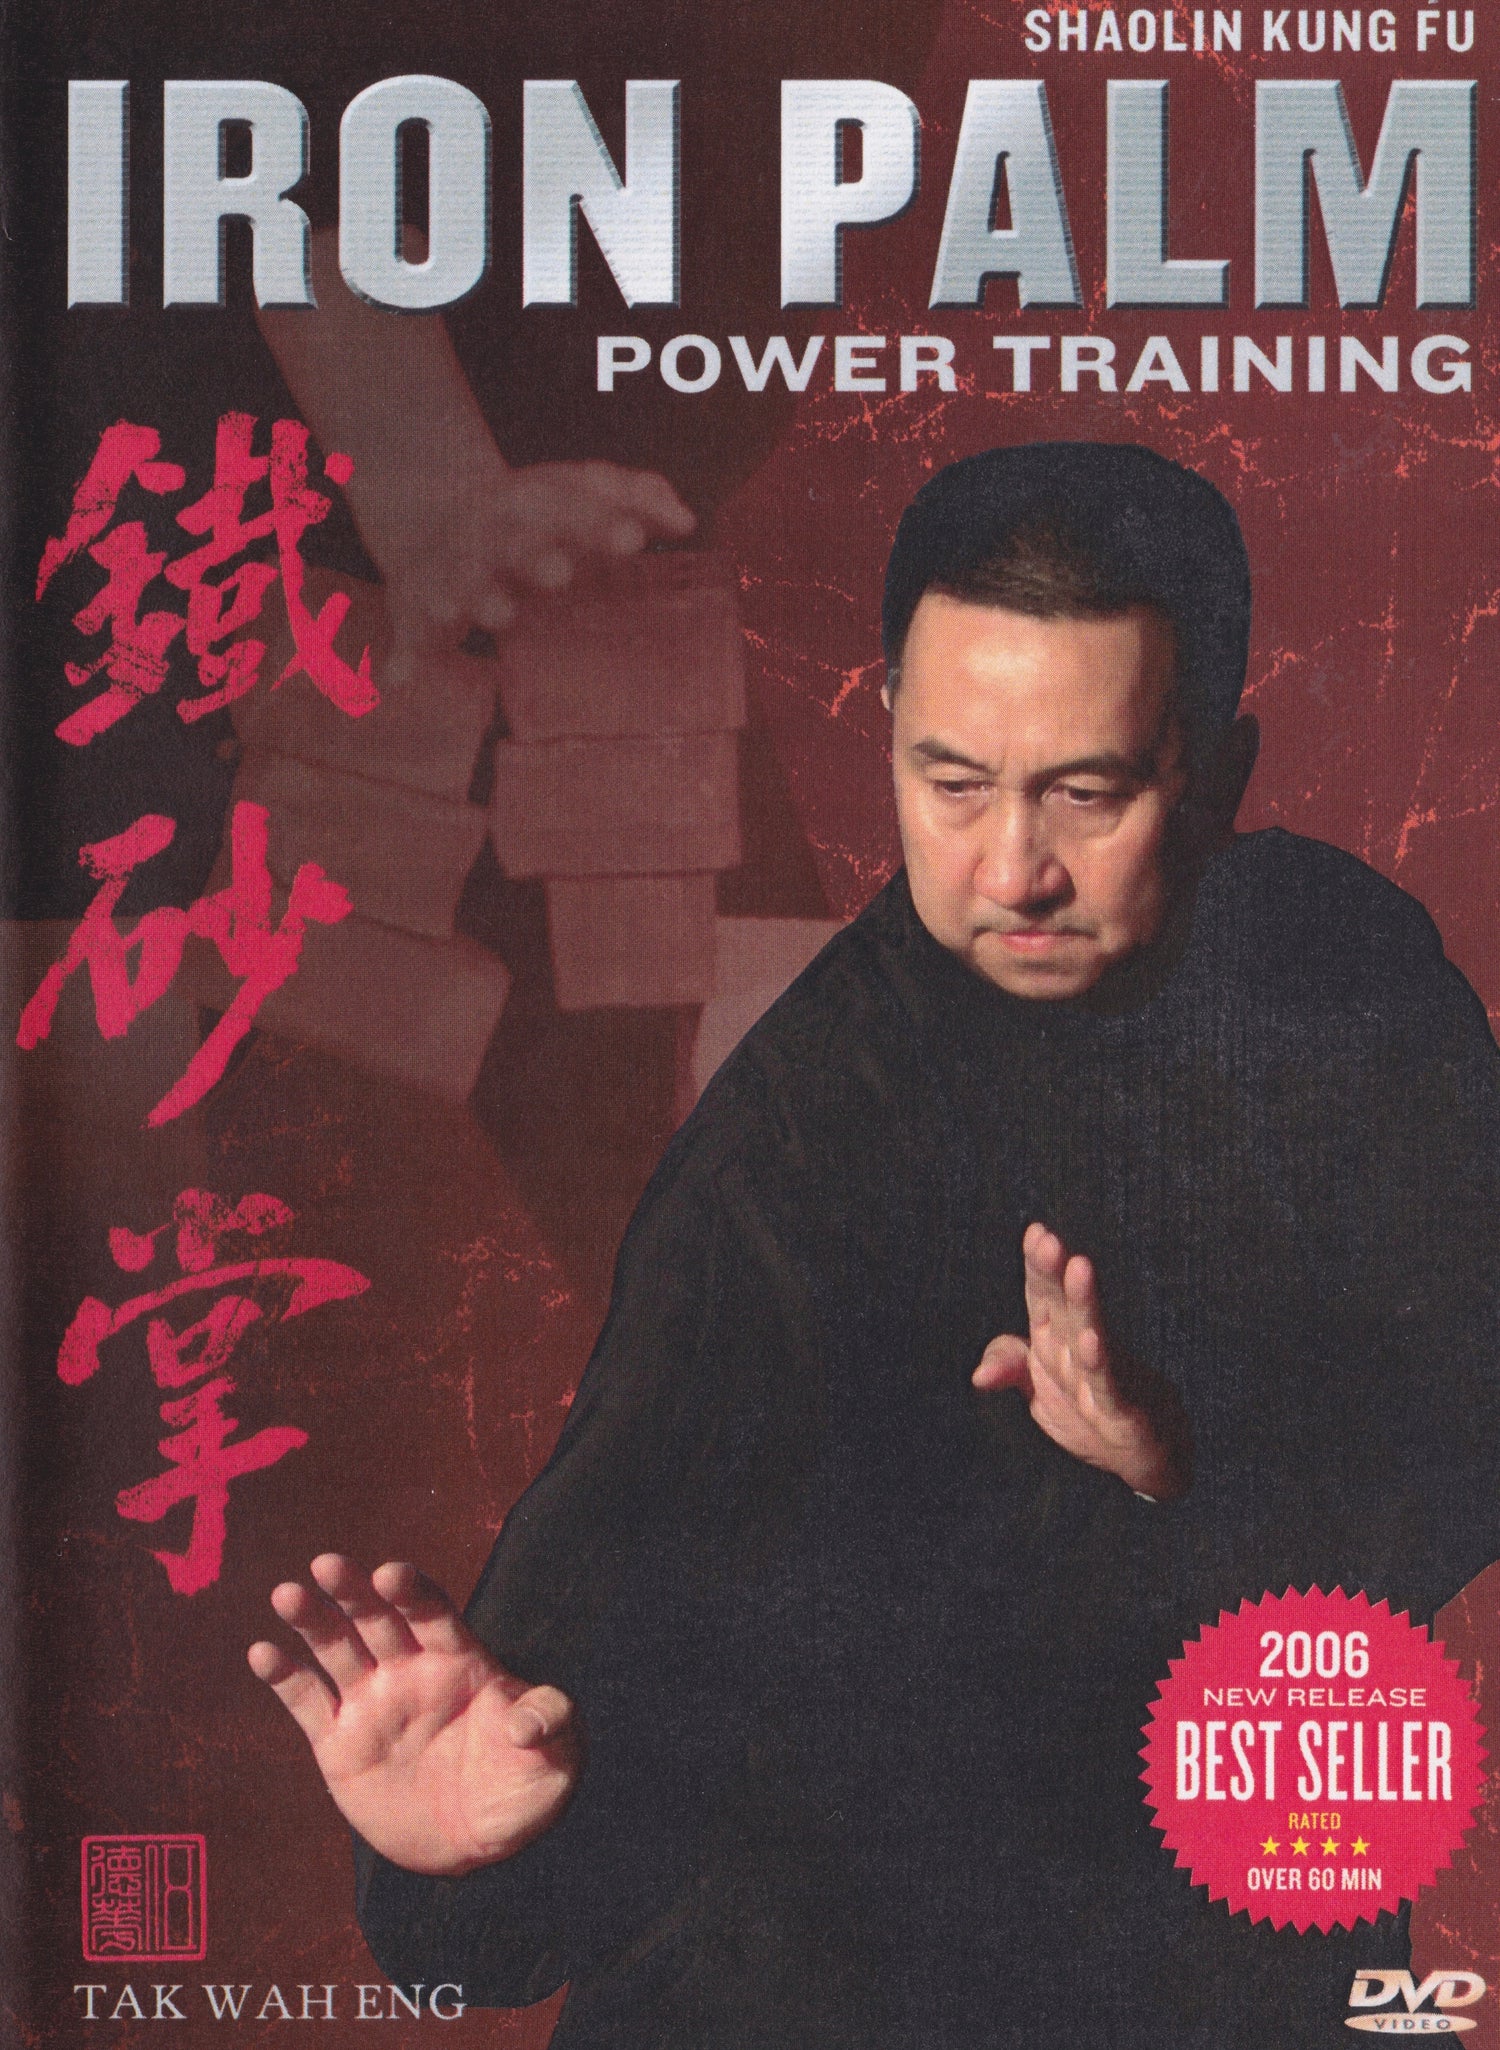 Shaolin Kung Fu Iron Palm Power Training DVD by Tak Wah Eng (Preowned)